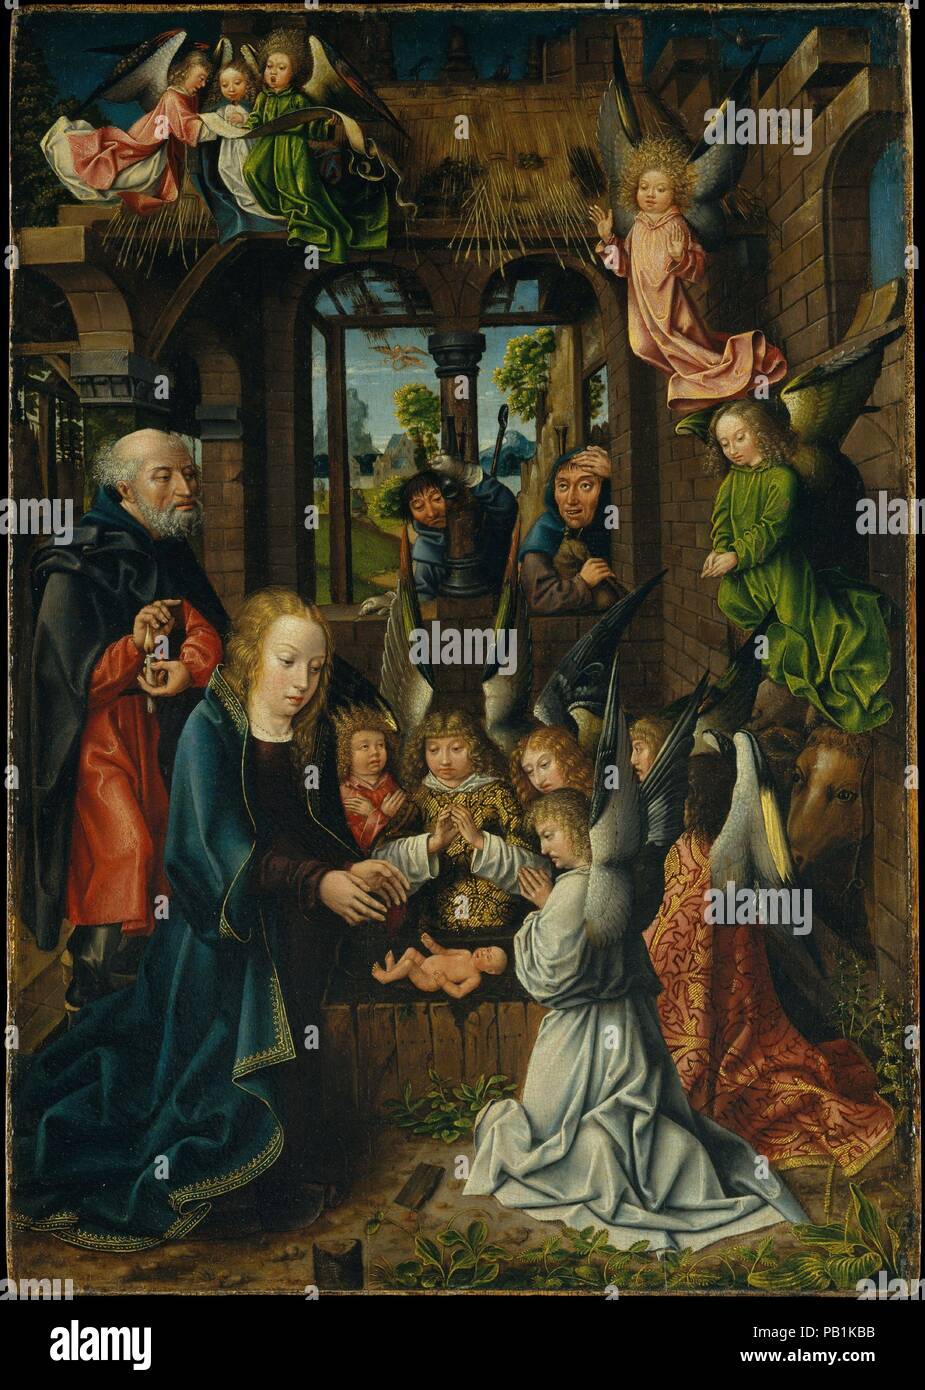 The Adoration of the Christ Child. Artist: Workshop of the Master of Frankfurt (Netherlandish, active Antwerp, ca. 1496-1518). Culture: Netherlandish. Dimensions: Overall 23 1/8 x 16 1/4 in. (58.7 x 41.3 cm); painted surface 22 7/8 x 16 in. (58.1 x 40.1 cm). Date: possibly 1496-1502. Museum: Metropolitan Museum of Art, New York, USA. Stock Photo